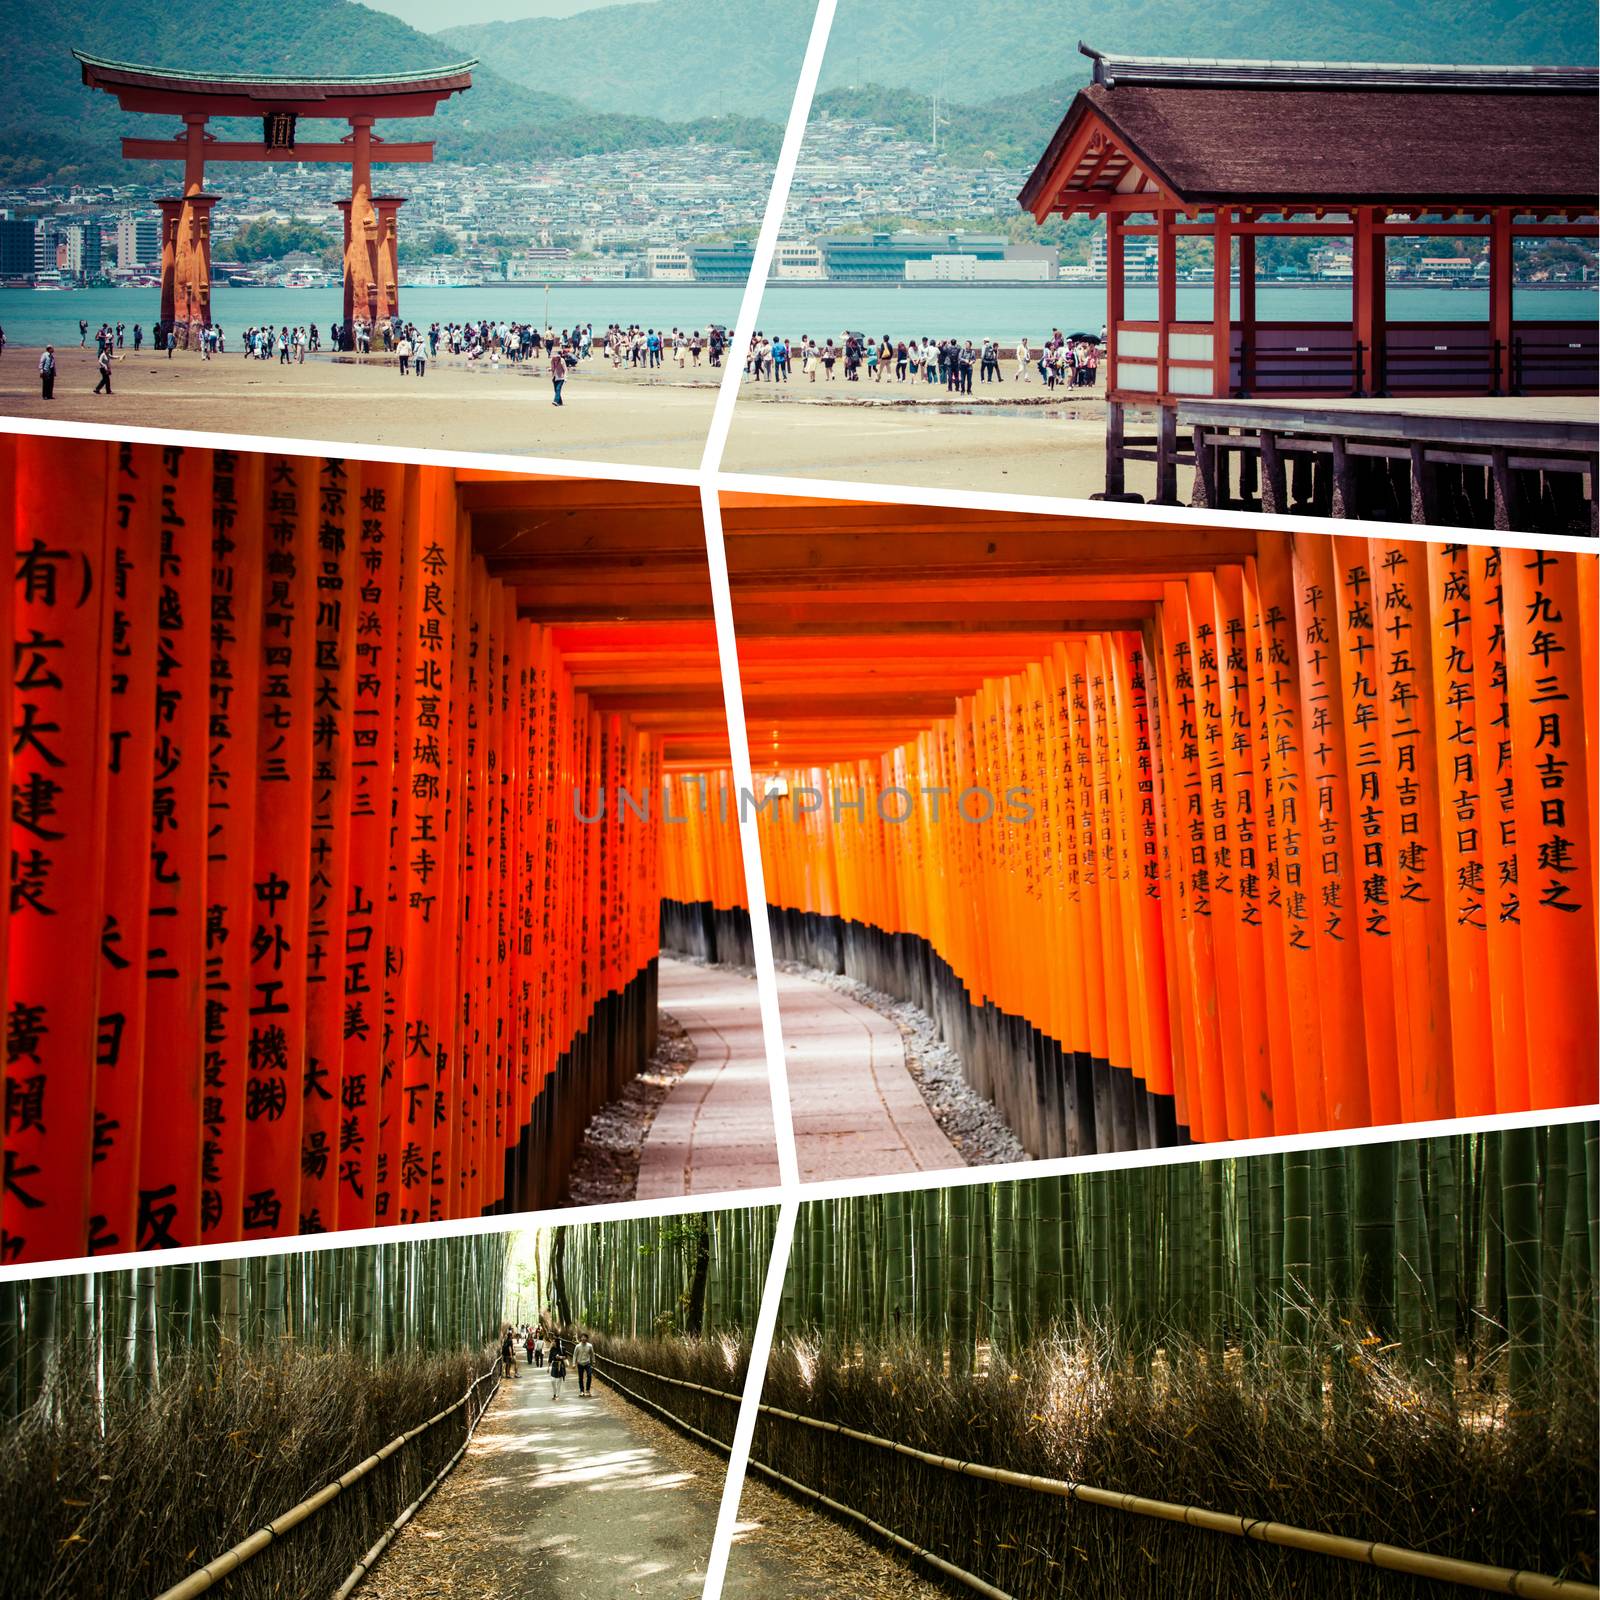 Collage of Japan images - travel background (my photos) by mariusz_prusaczyk